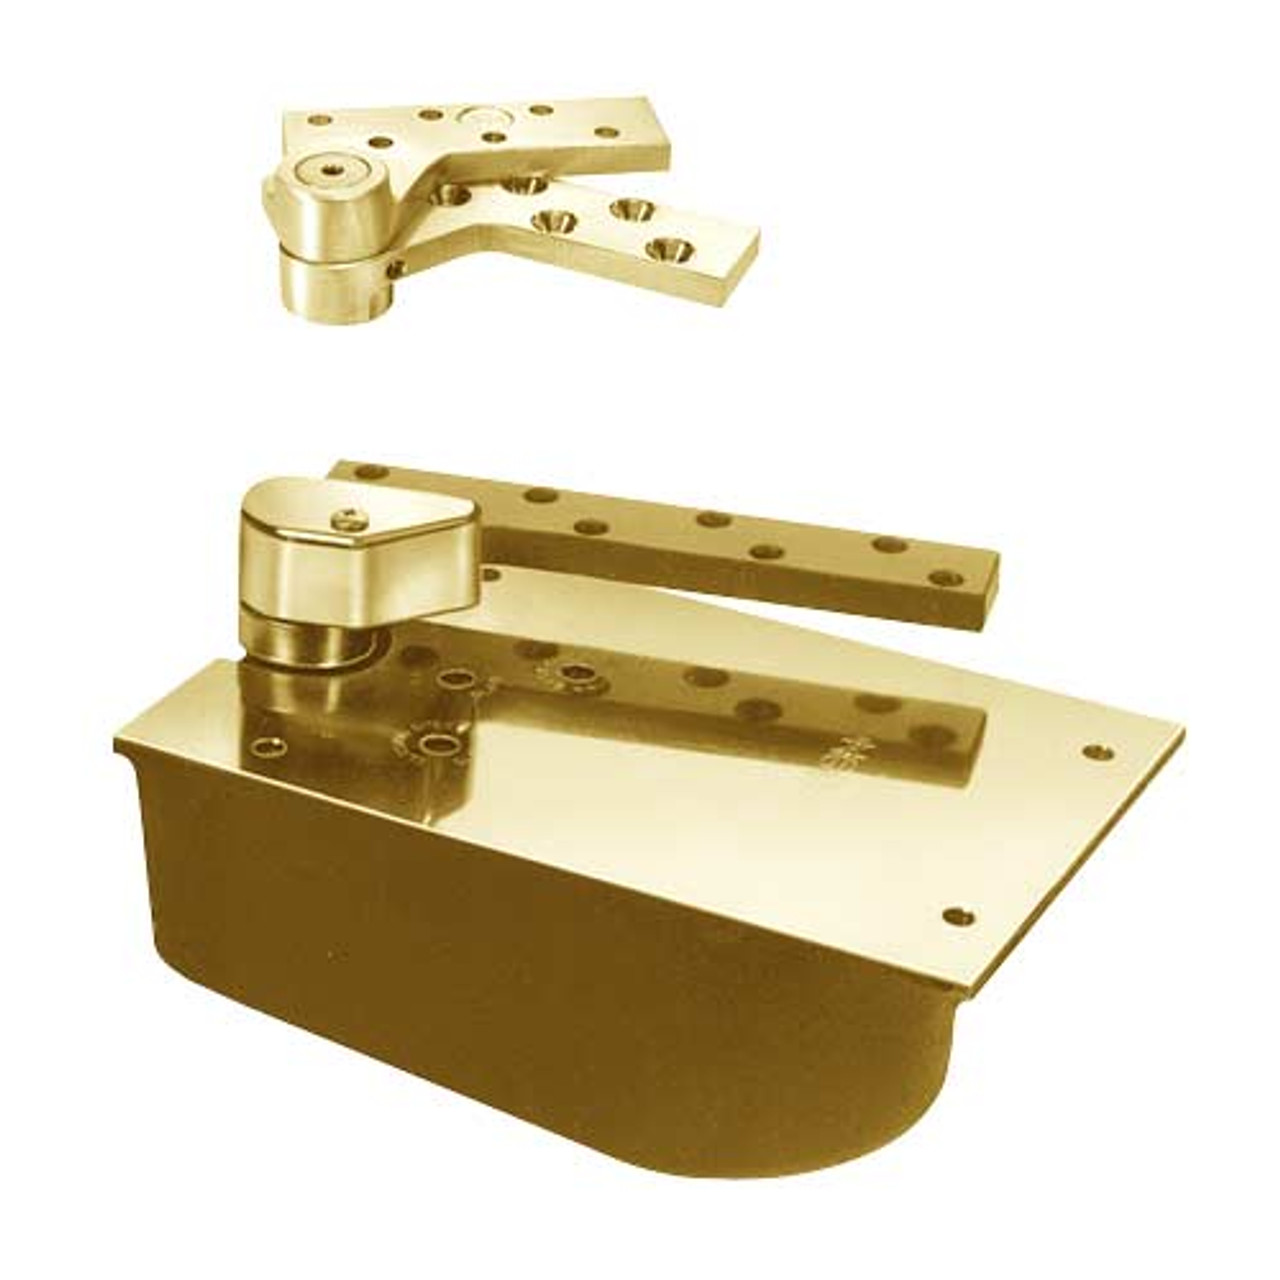 SCL27-90S-RH-605 Rixson 27 Series Extra Heavy Duty Lead Lined Offset Floor Closer in Bright Brass Finish